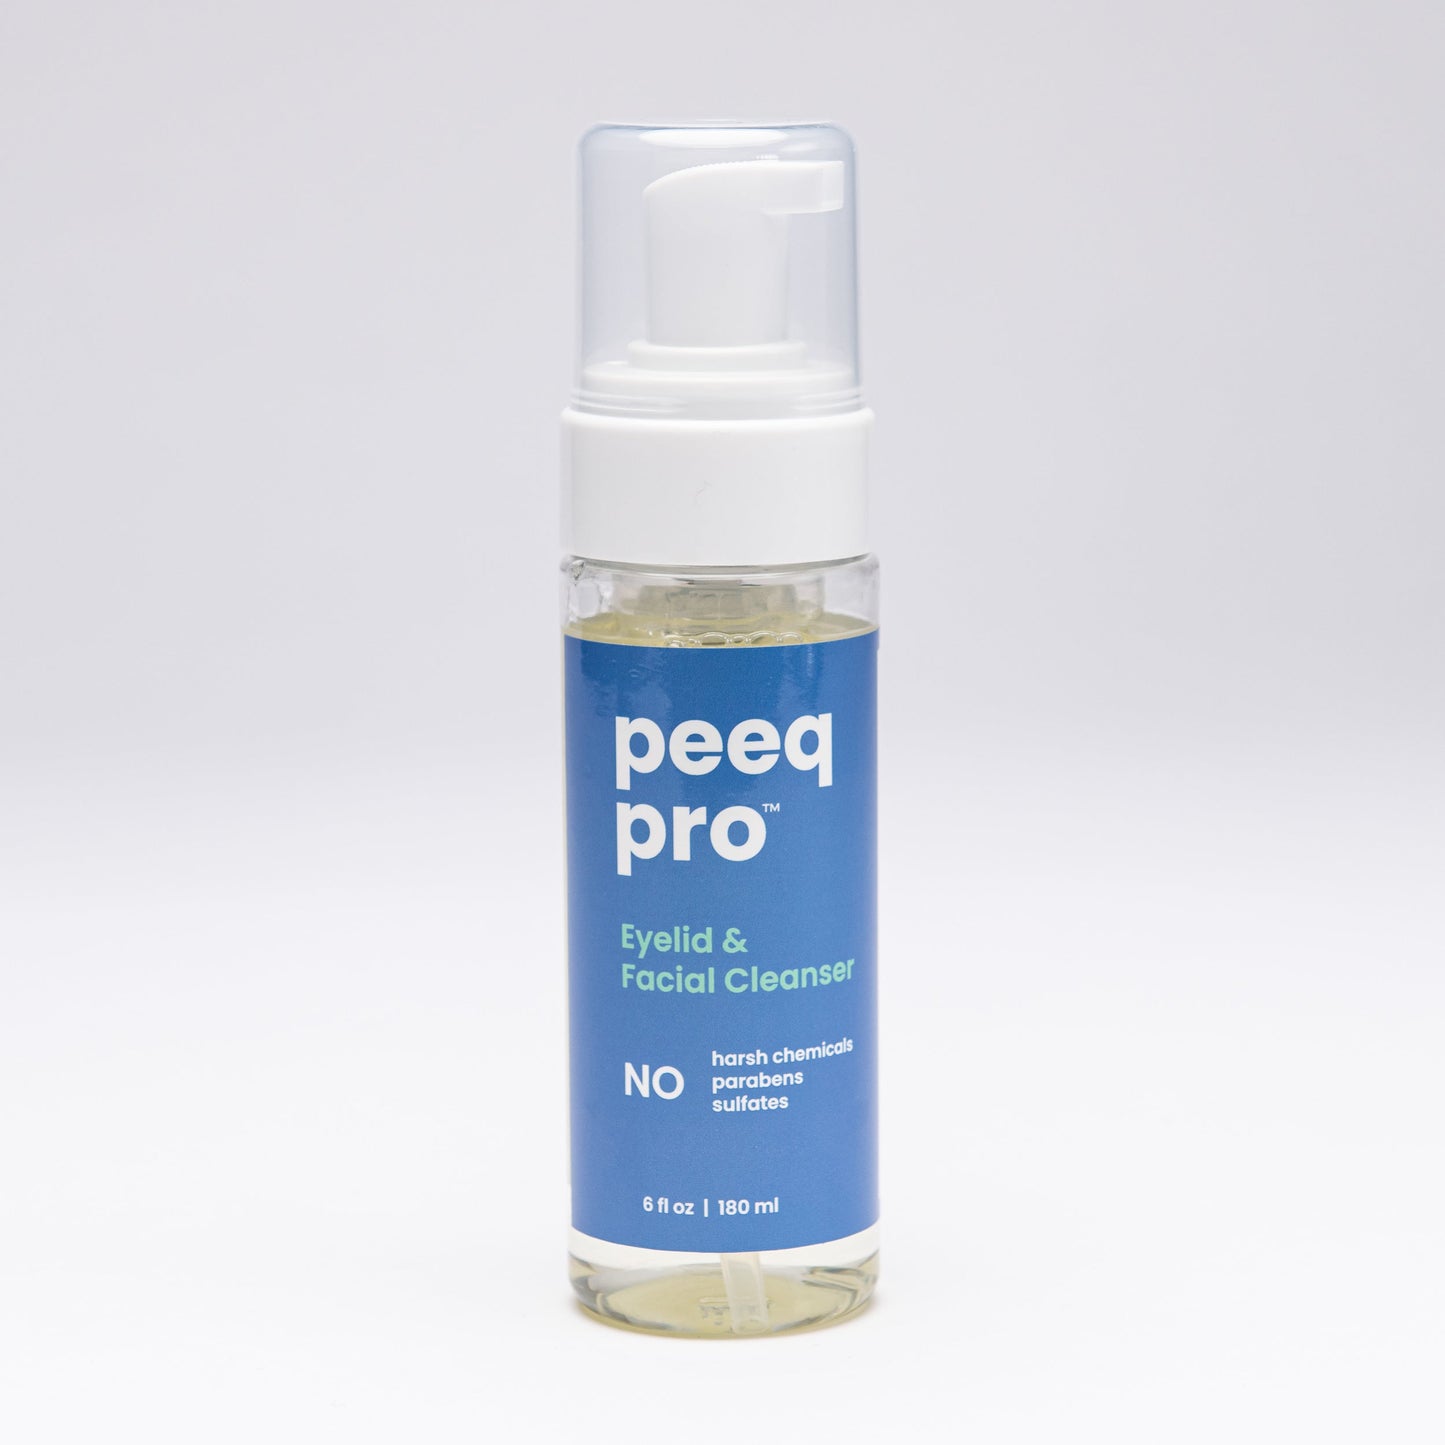 Peeq Pro Eyelid & Facial Cleanser